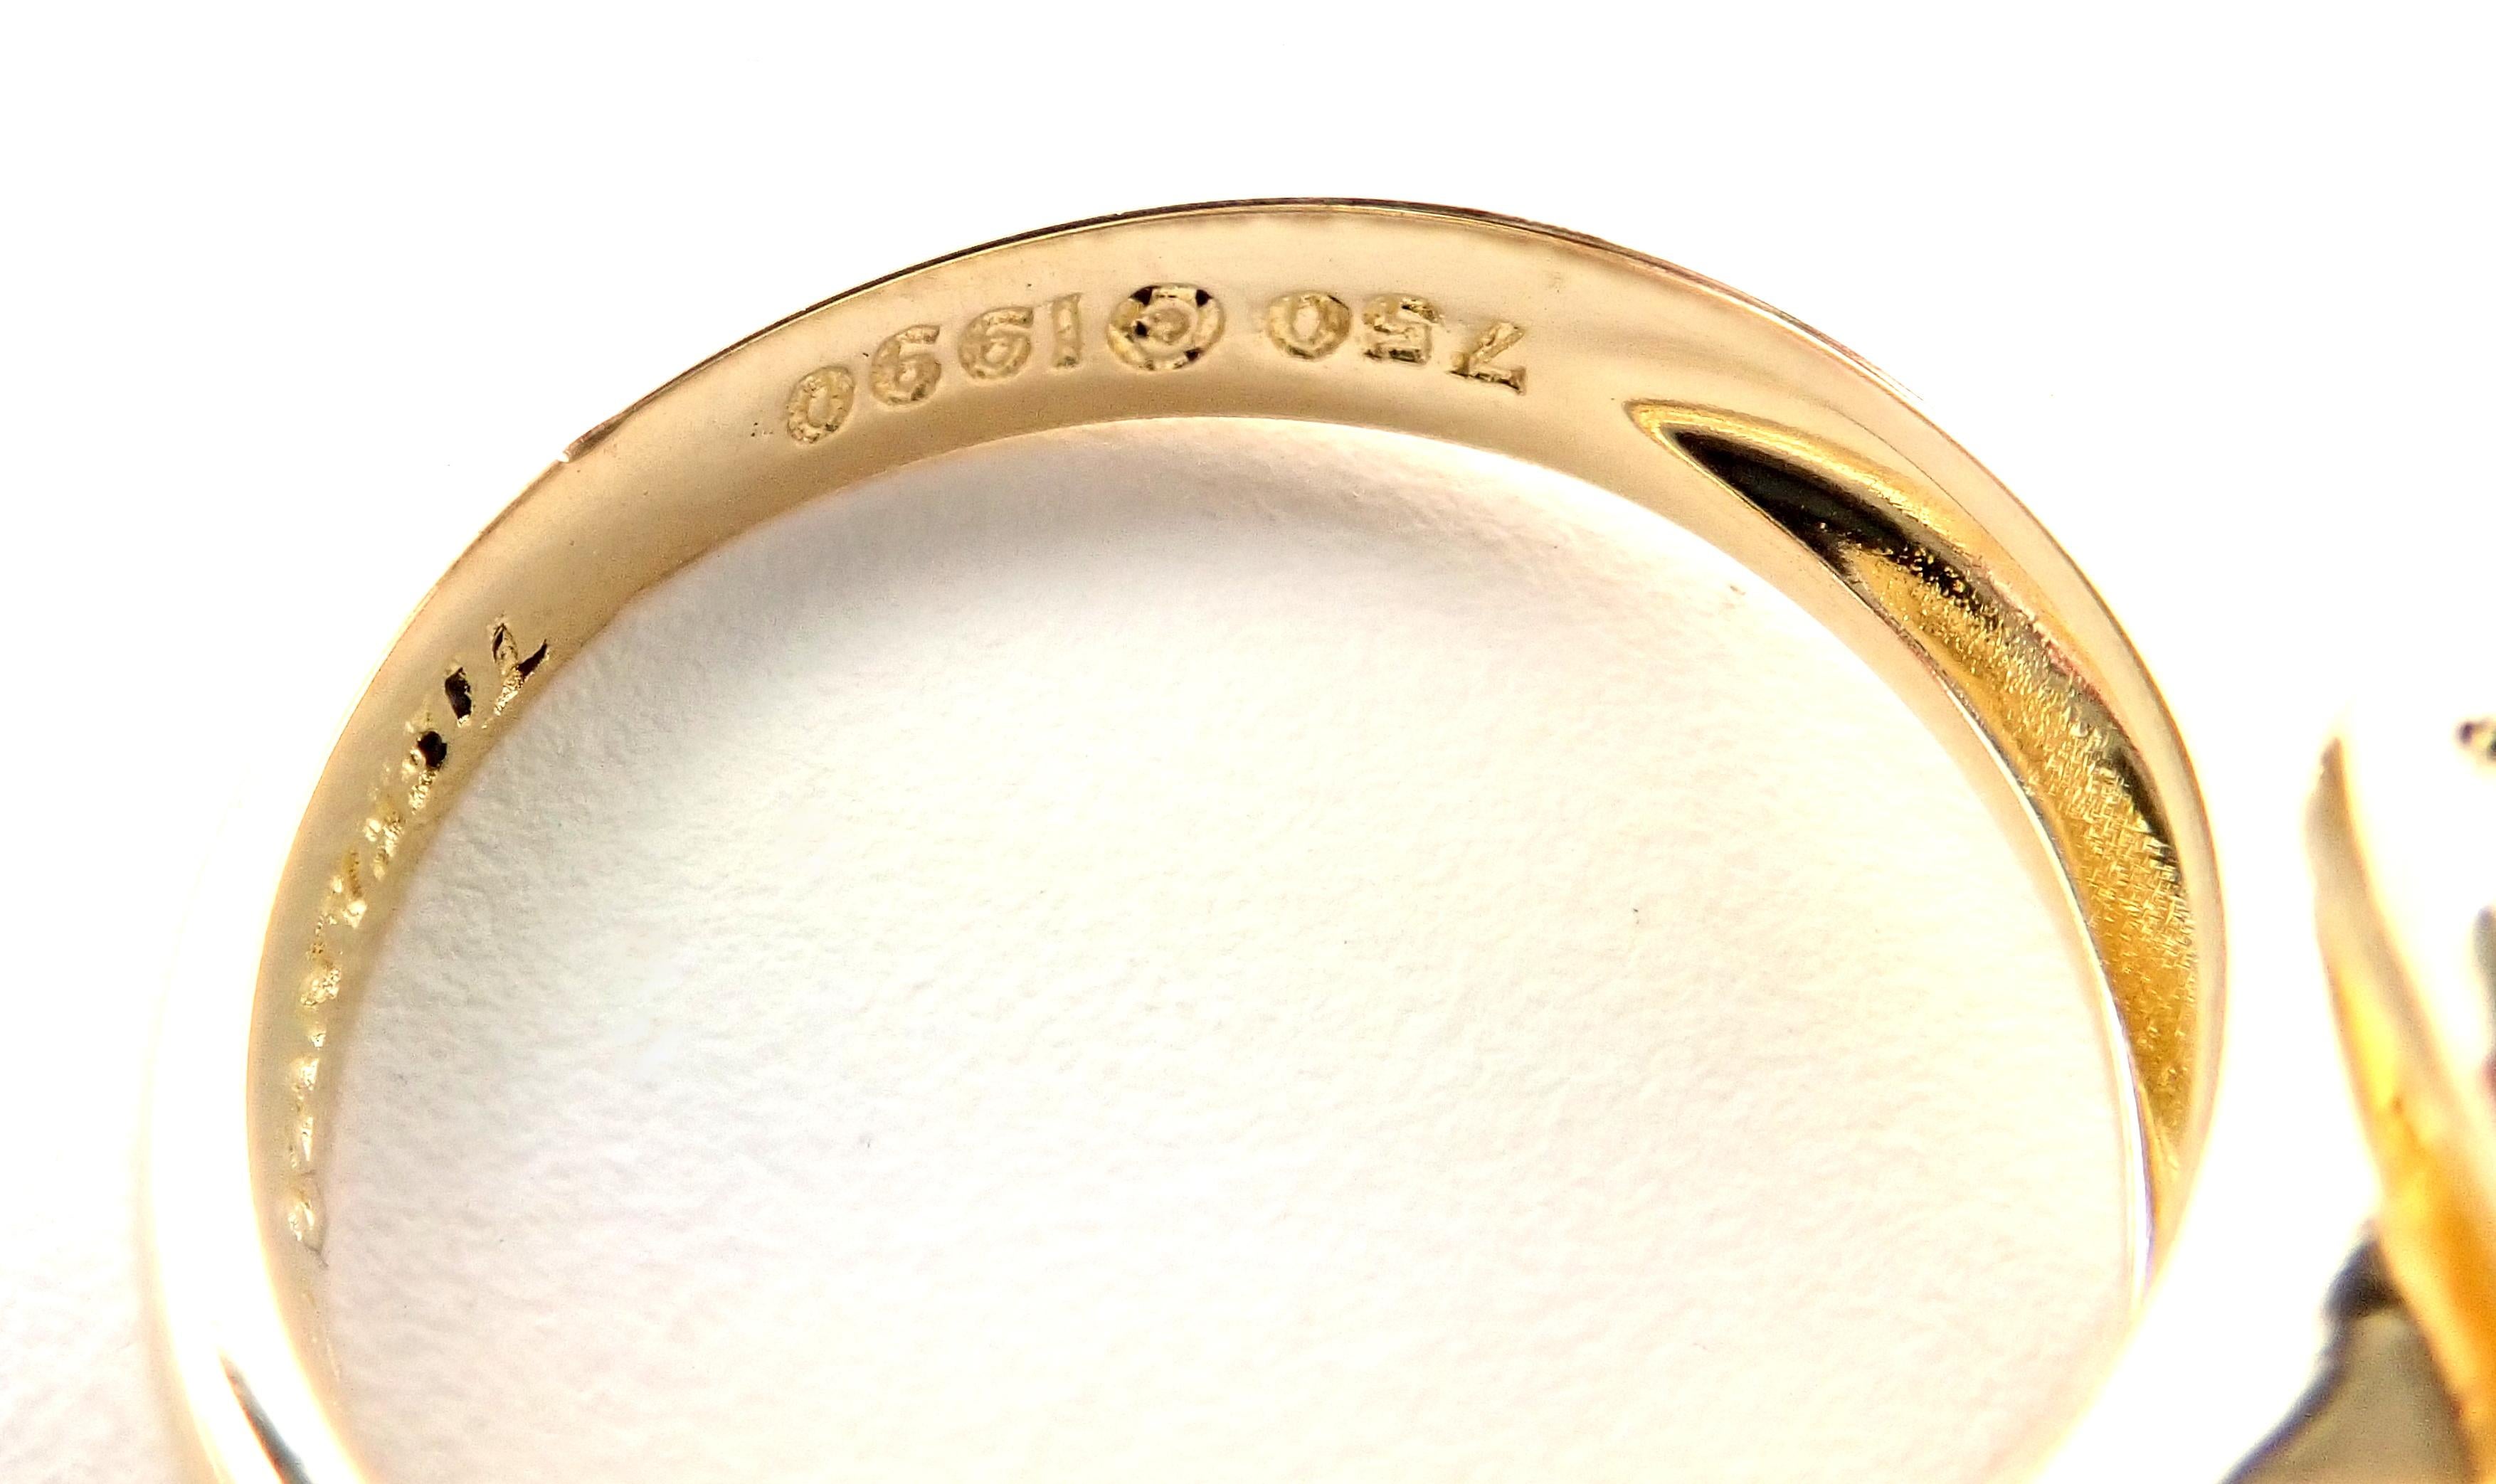 Tiffany & Co. Diamond Signature X Yellow Gold Band Ring In Excellent Condition For Sale In Holland, PA